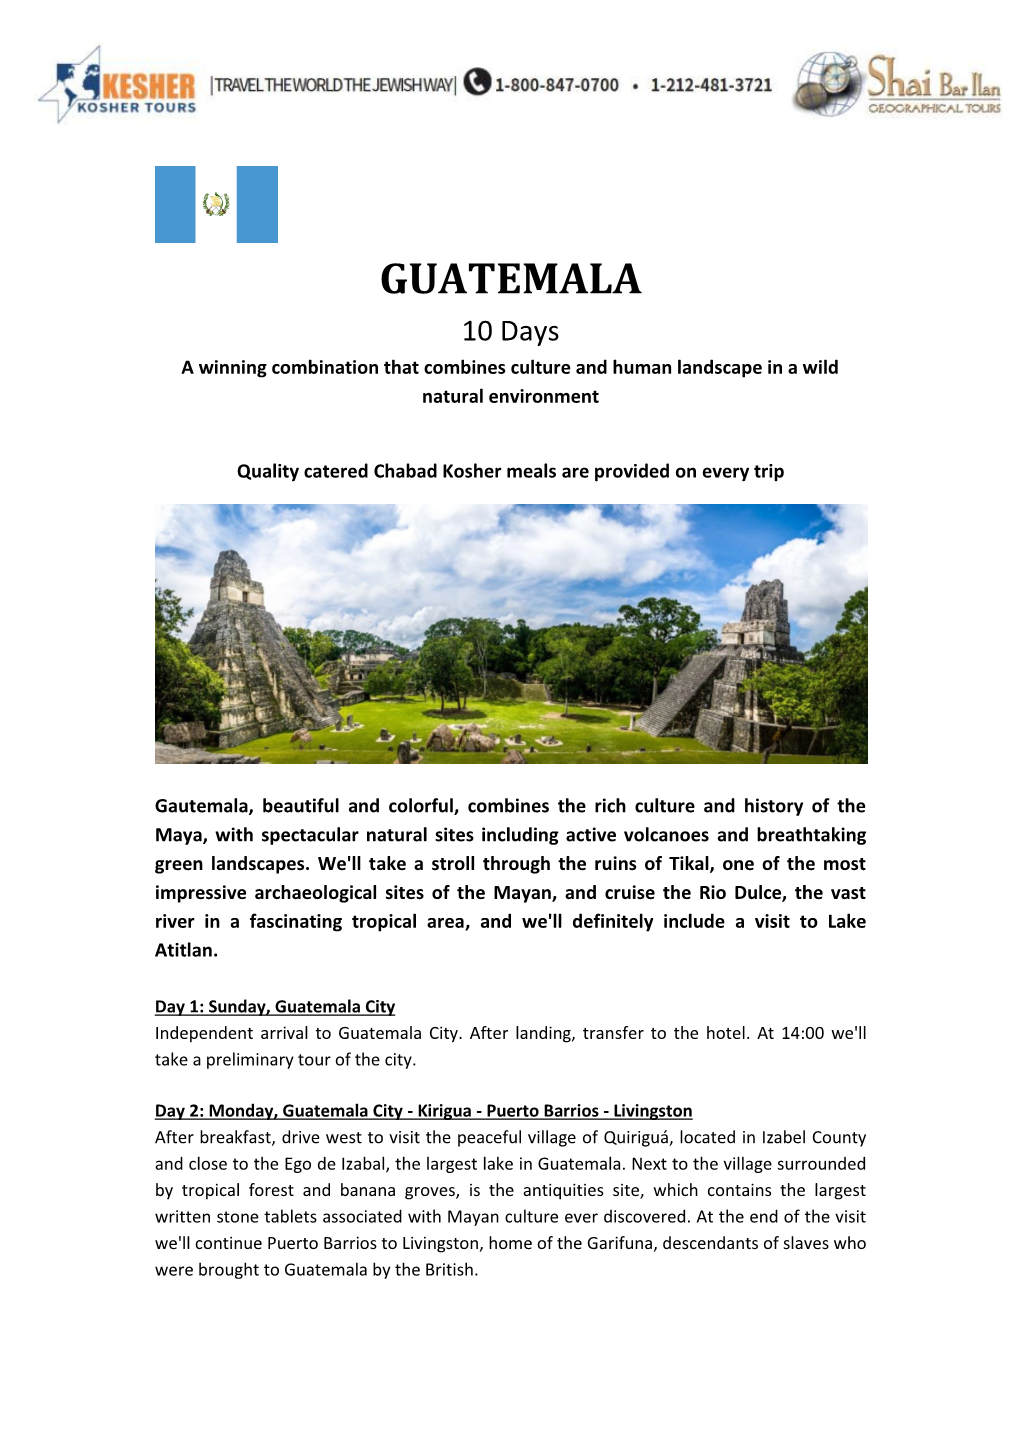 GUATEMALA 10 Days a Winning Combination That Combines Culture and Human Landscape in a Wild Natural Environment